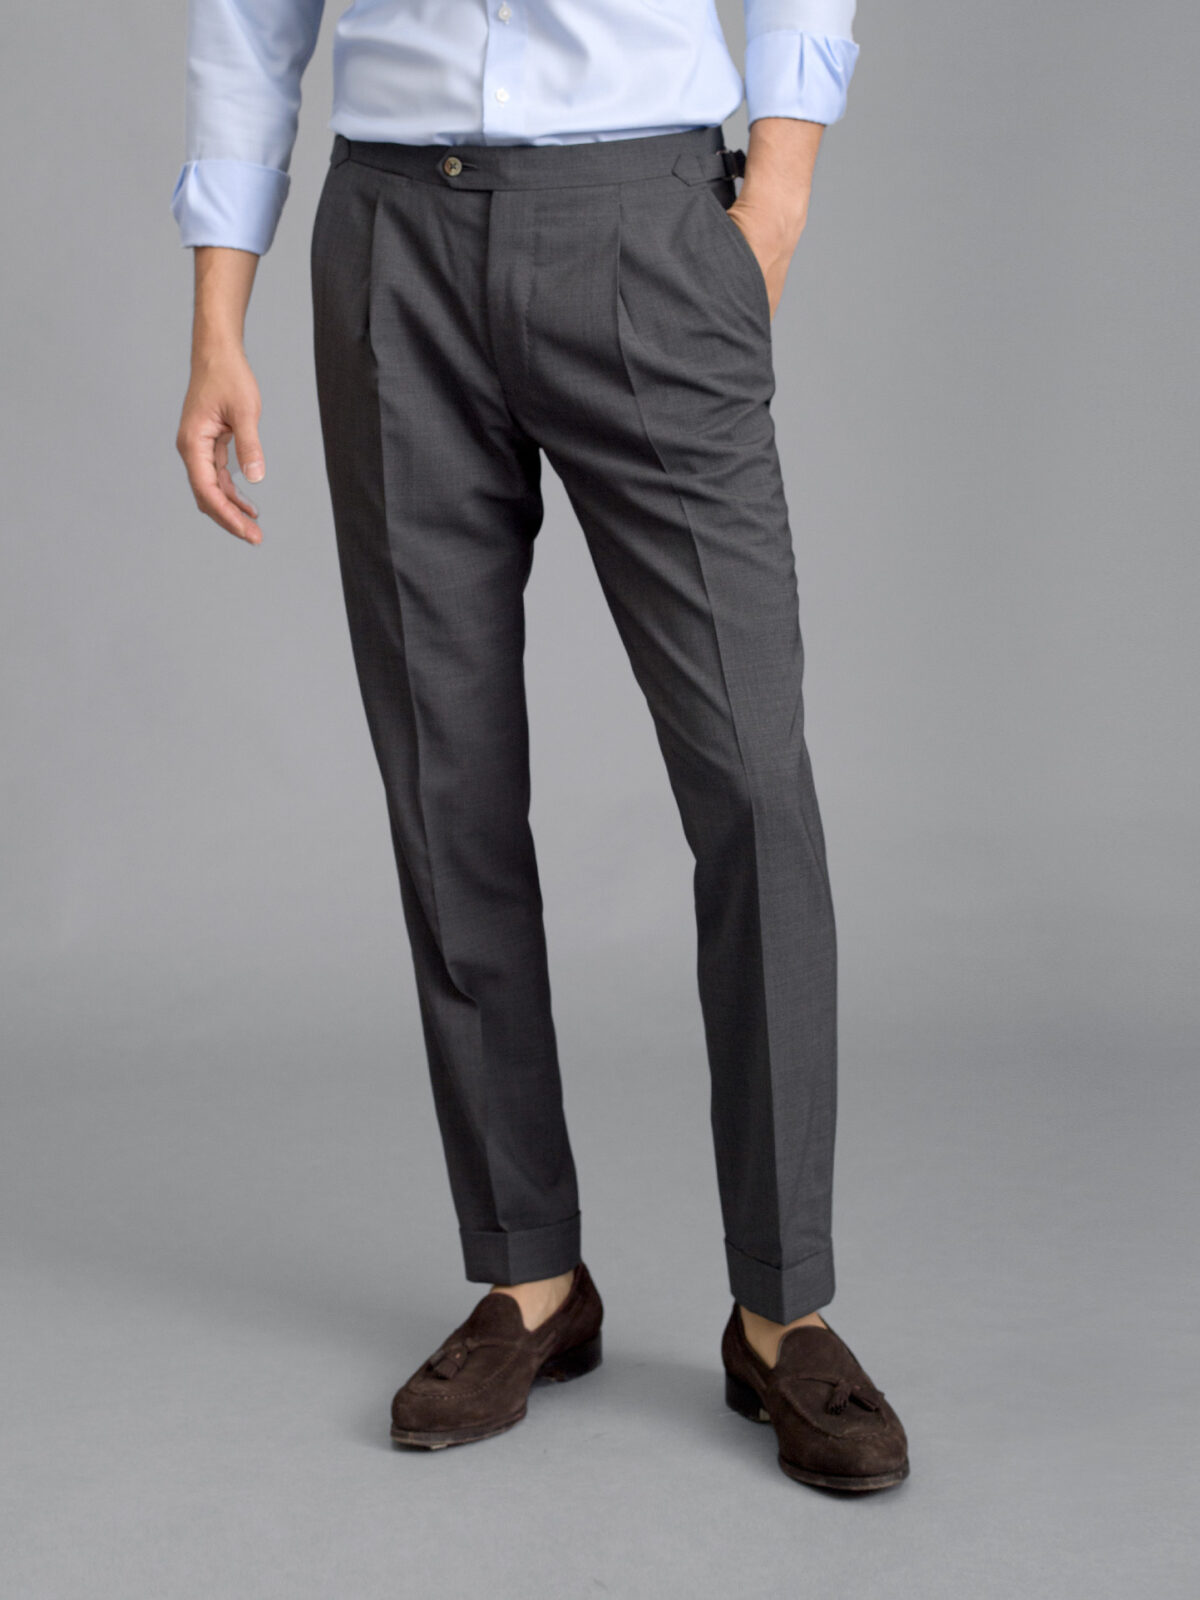 Pleated Mens Trousers :Buy Pleated Mens Trousers Online at Low Prices on  Snapdeal.com